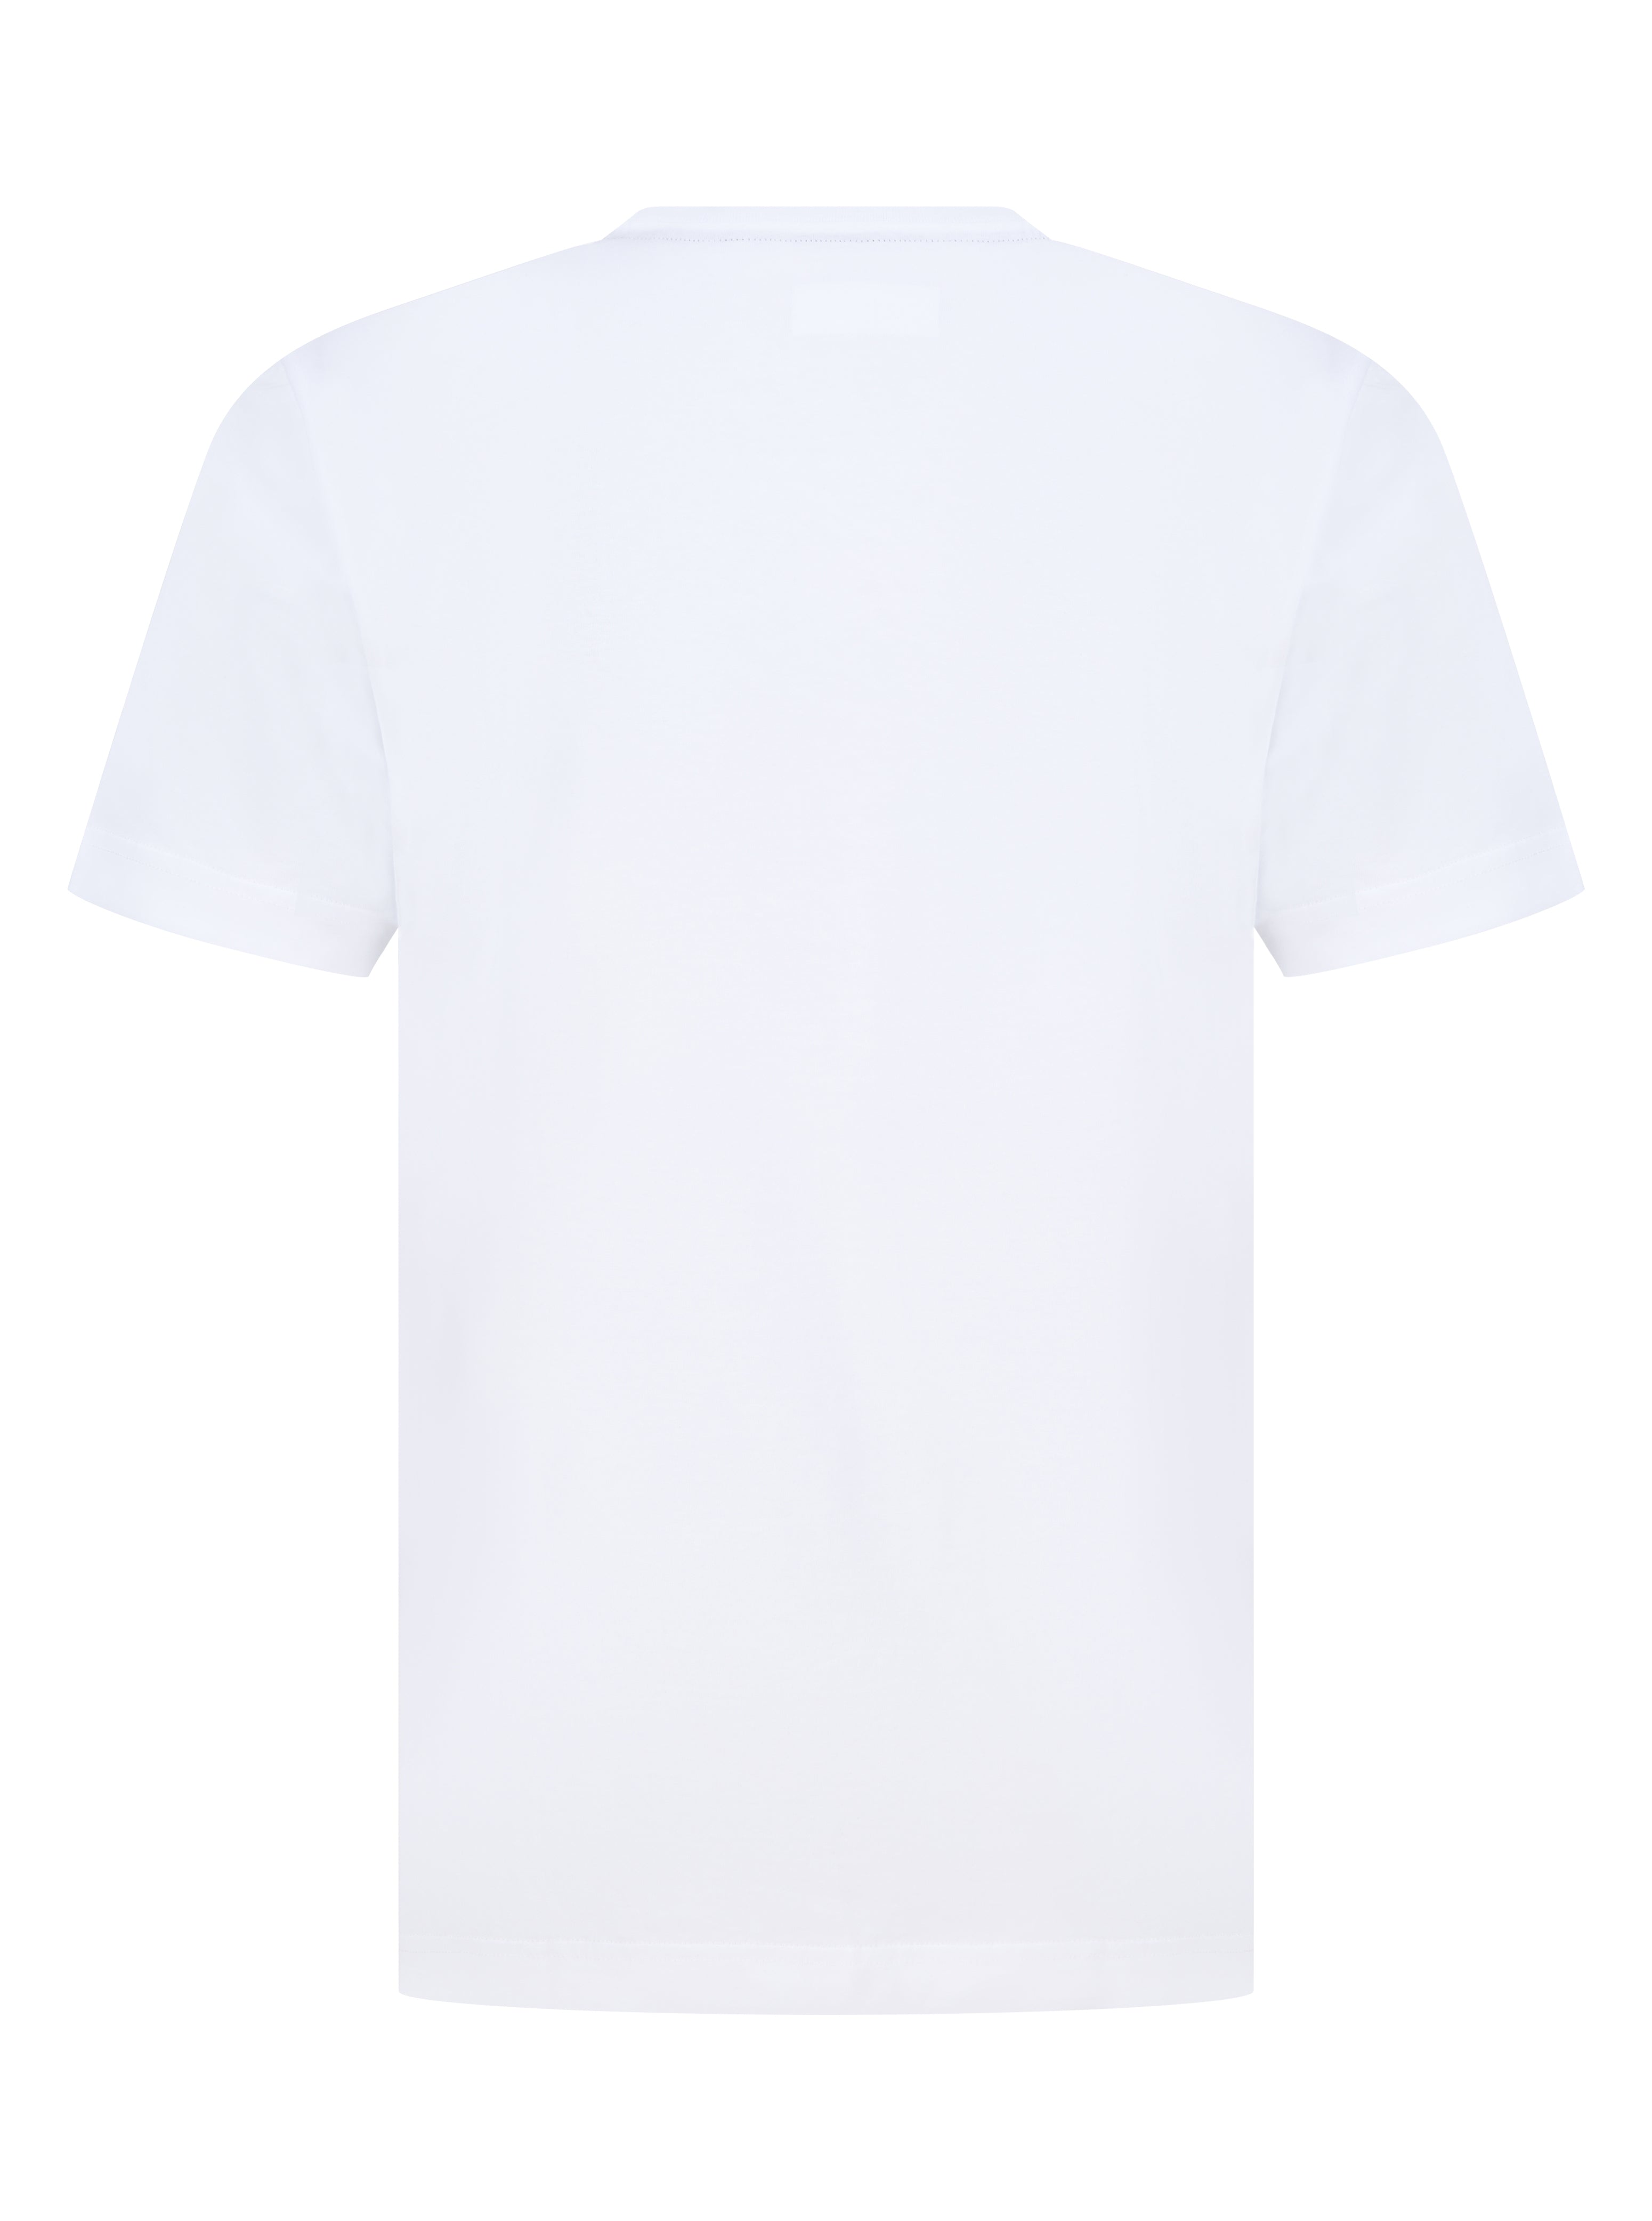 Load image into Gallery viewer, Missoni Sport Logo T Shirt White
